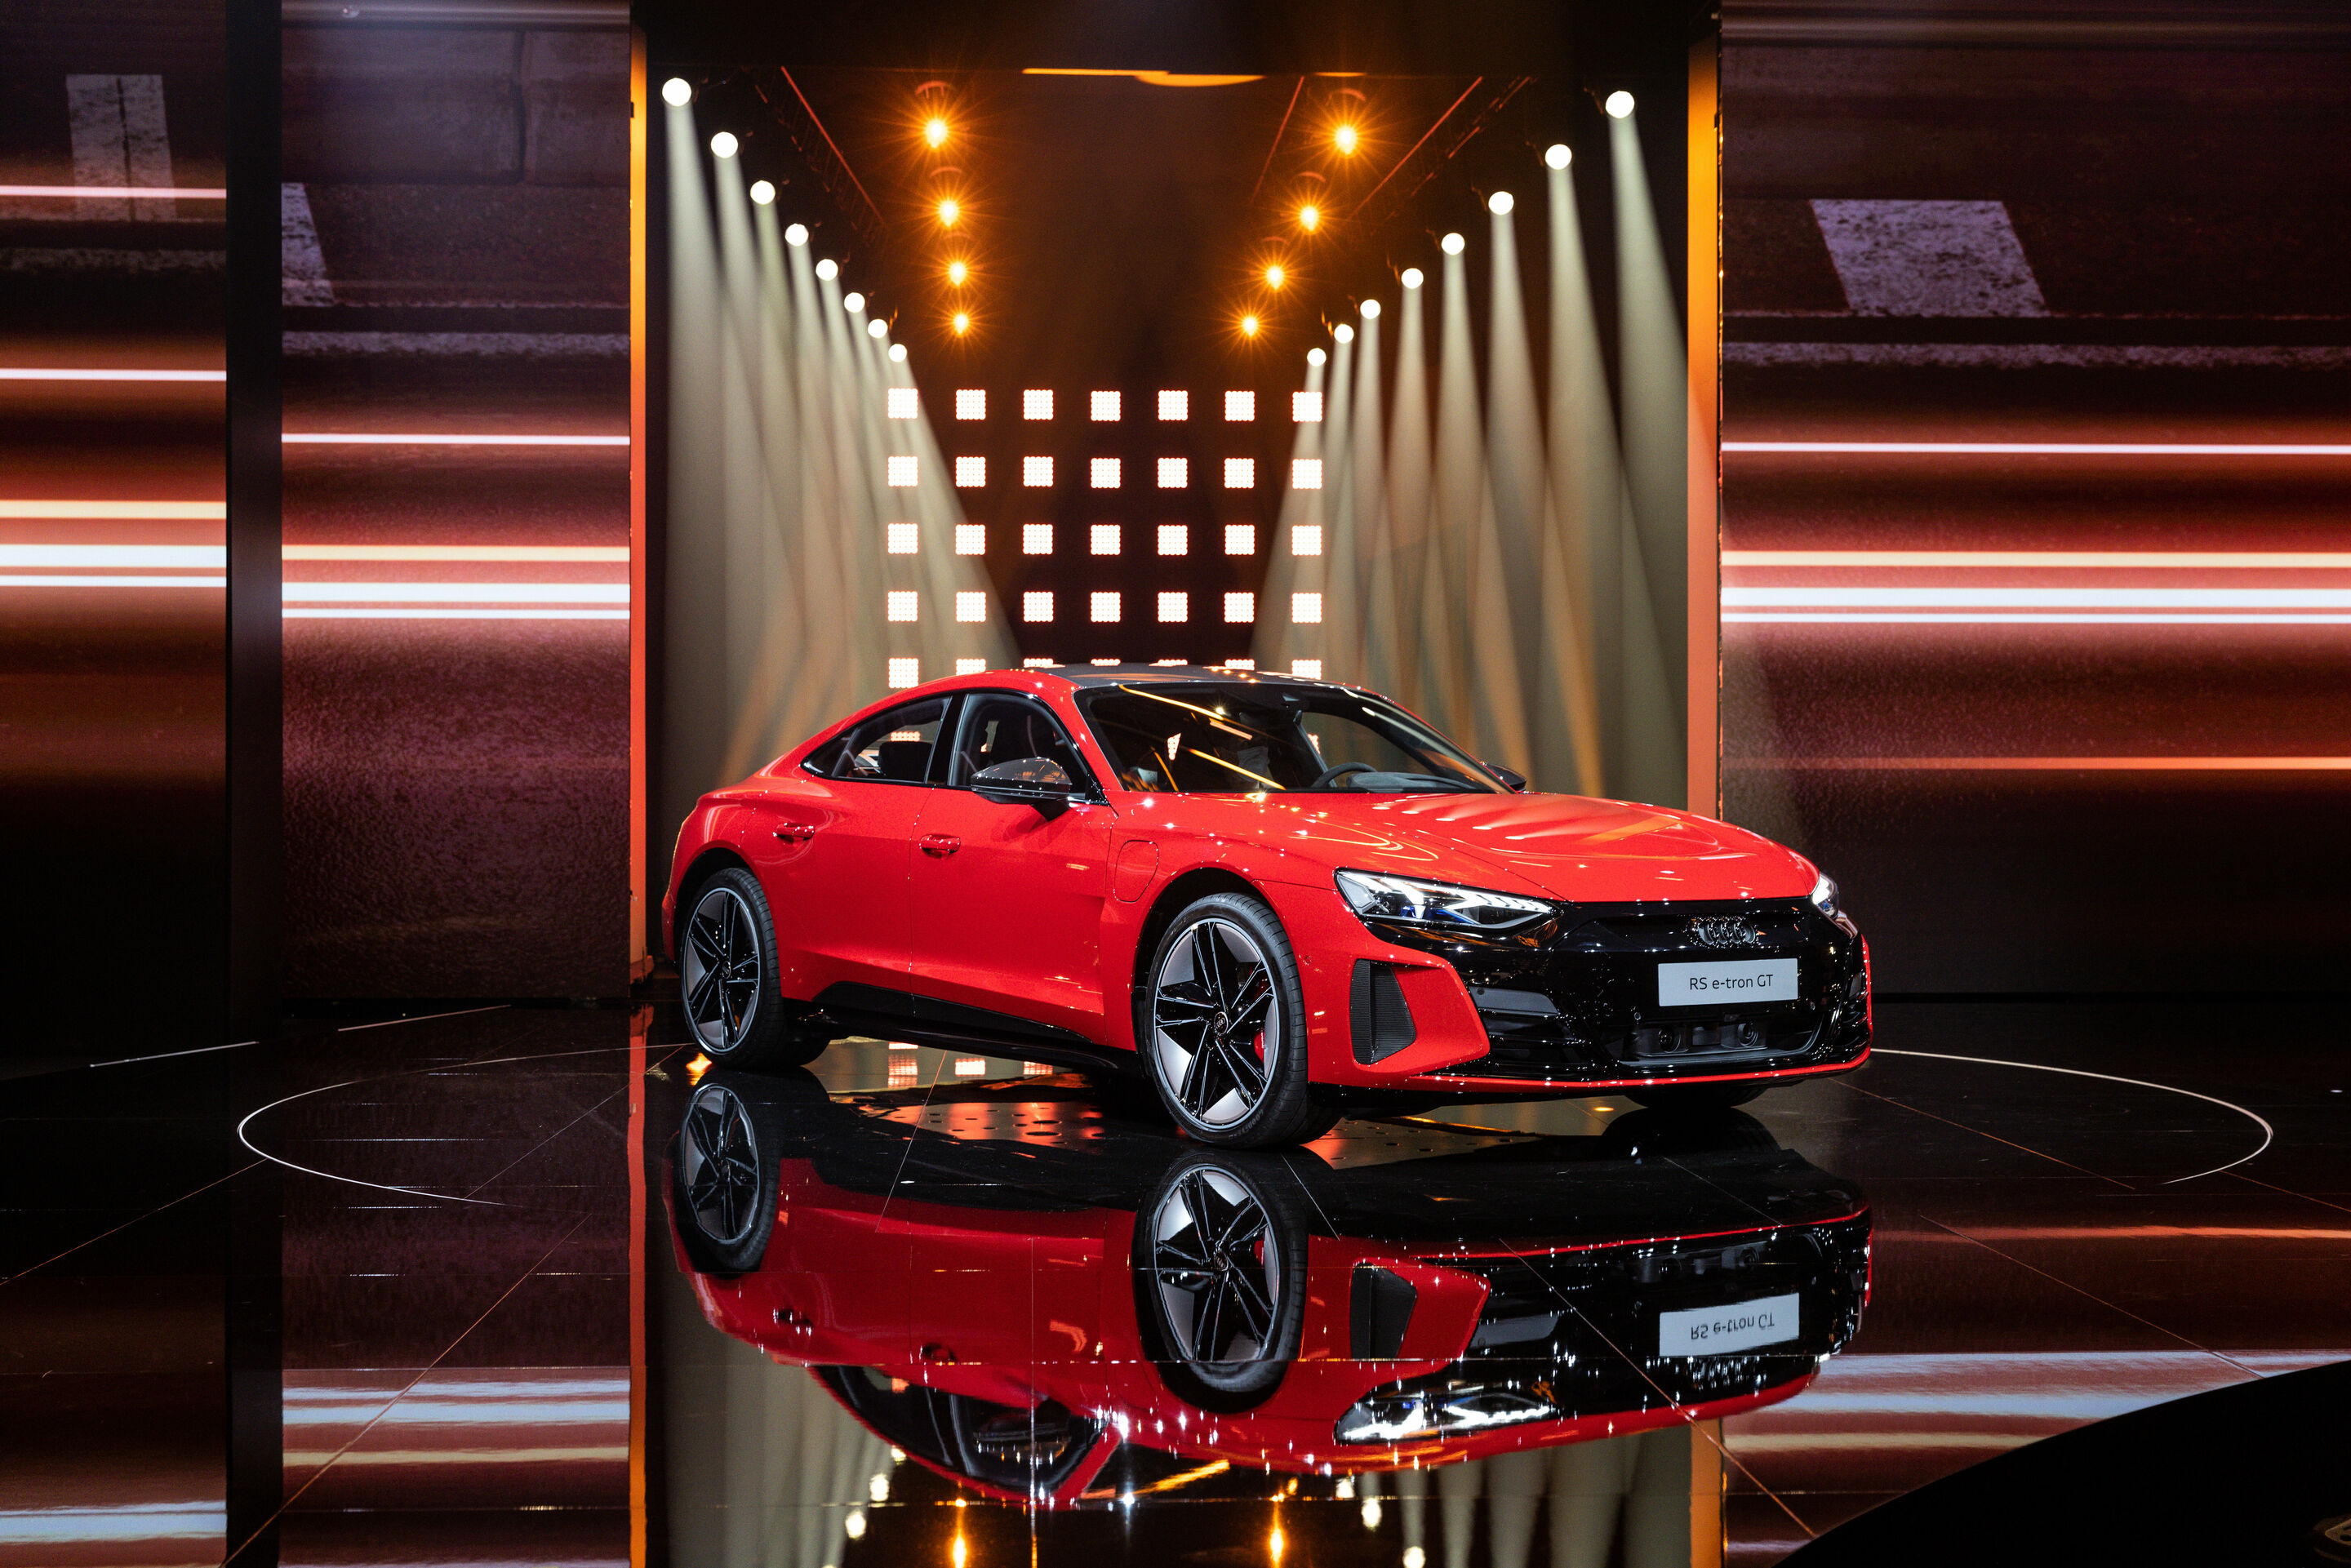 Dynamic and high-caliber: the online world premiere of the Audi e-tron GT